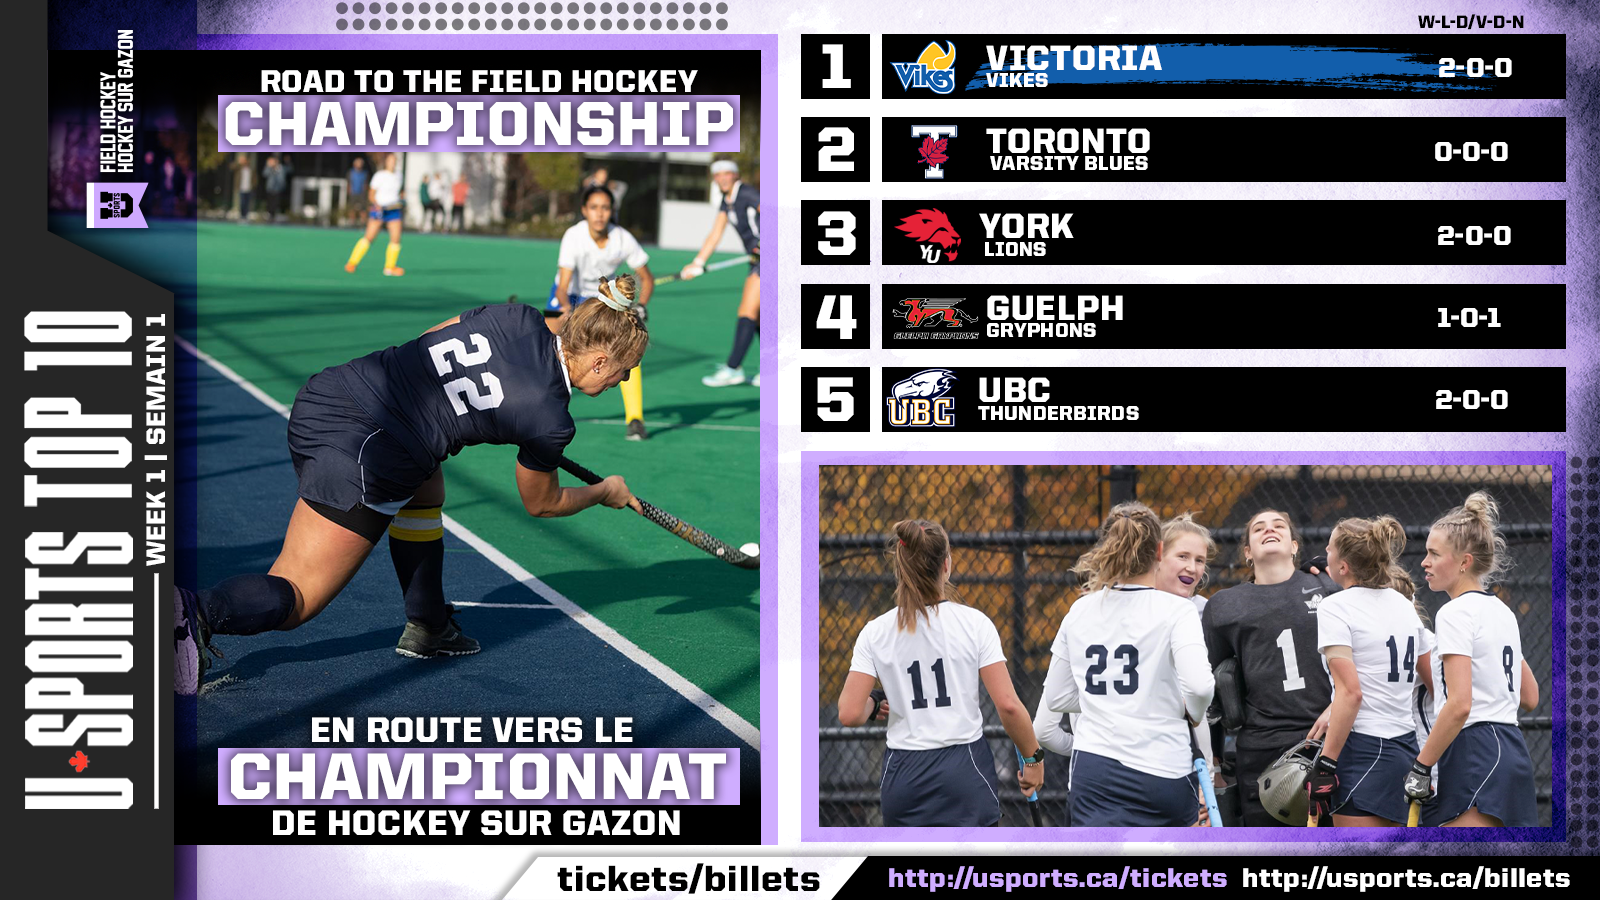 TOP_10_FHOCKEY_WK_1.png (1.66 MB)